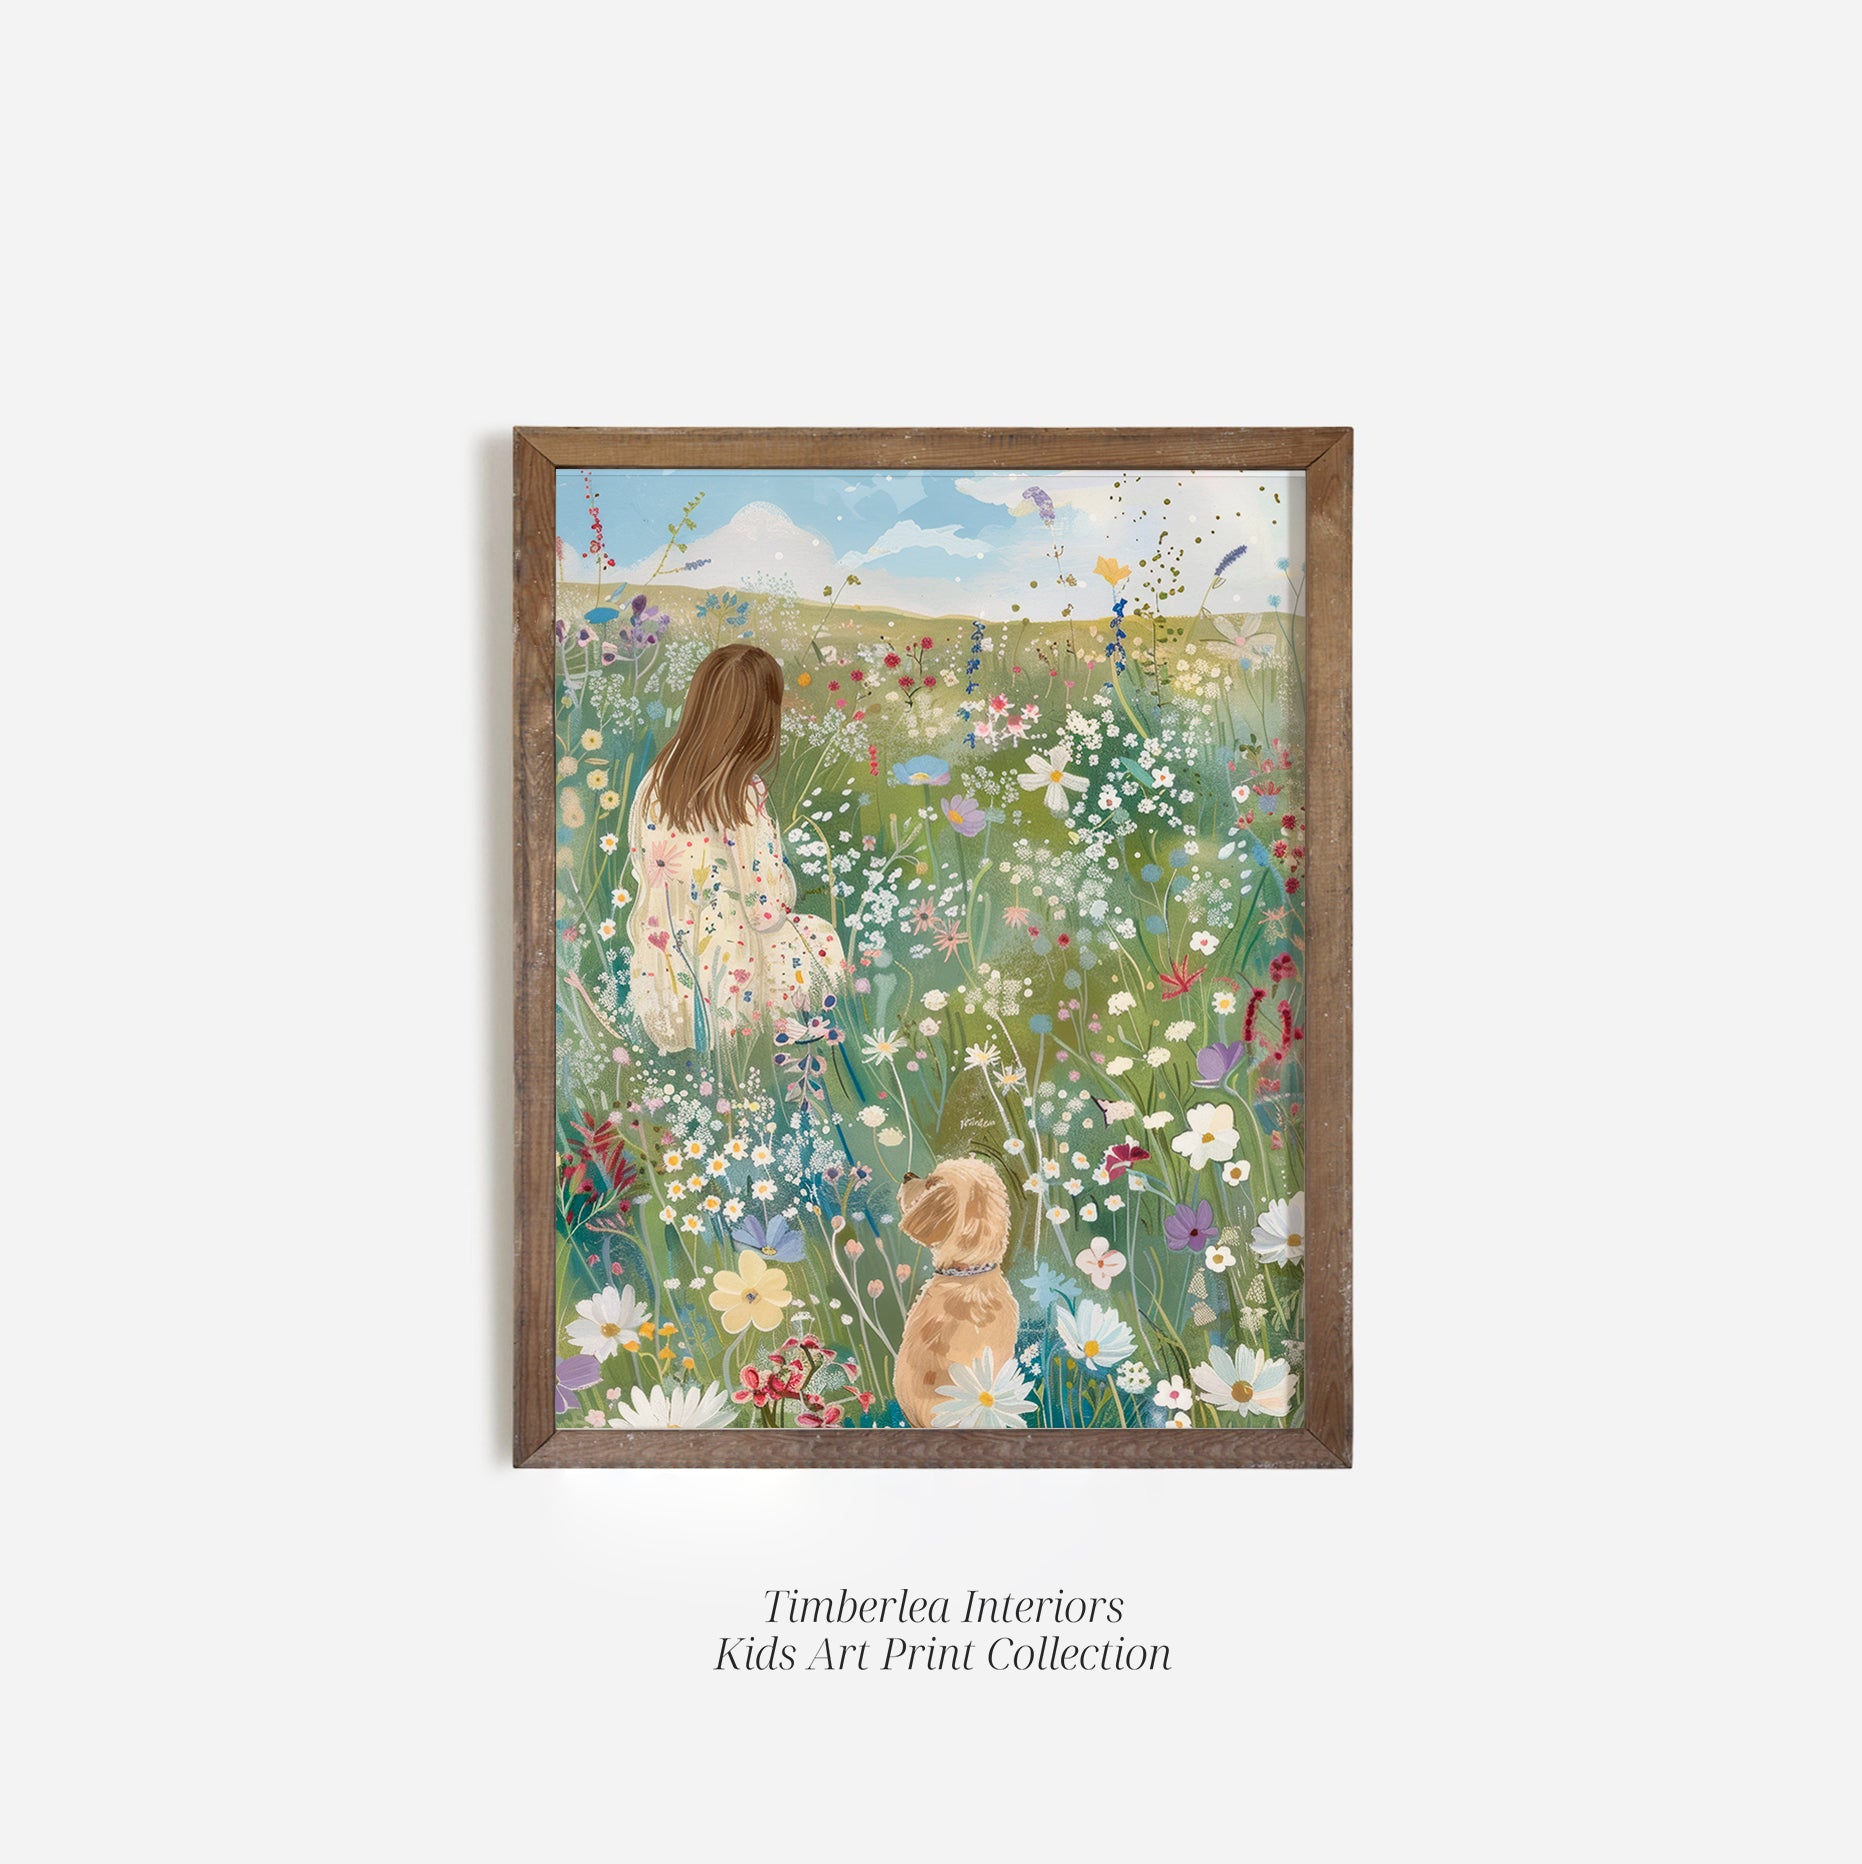 The "Field of Dreams" art print in a rustic wood frame, showing a girl and her dog in a beautiful meadow filled with diverse wildflowers.